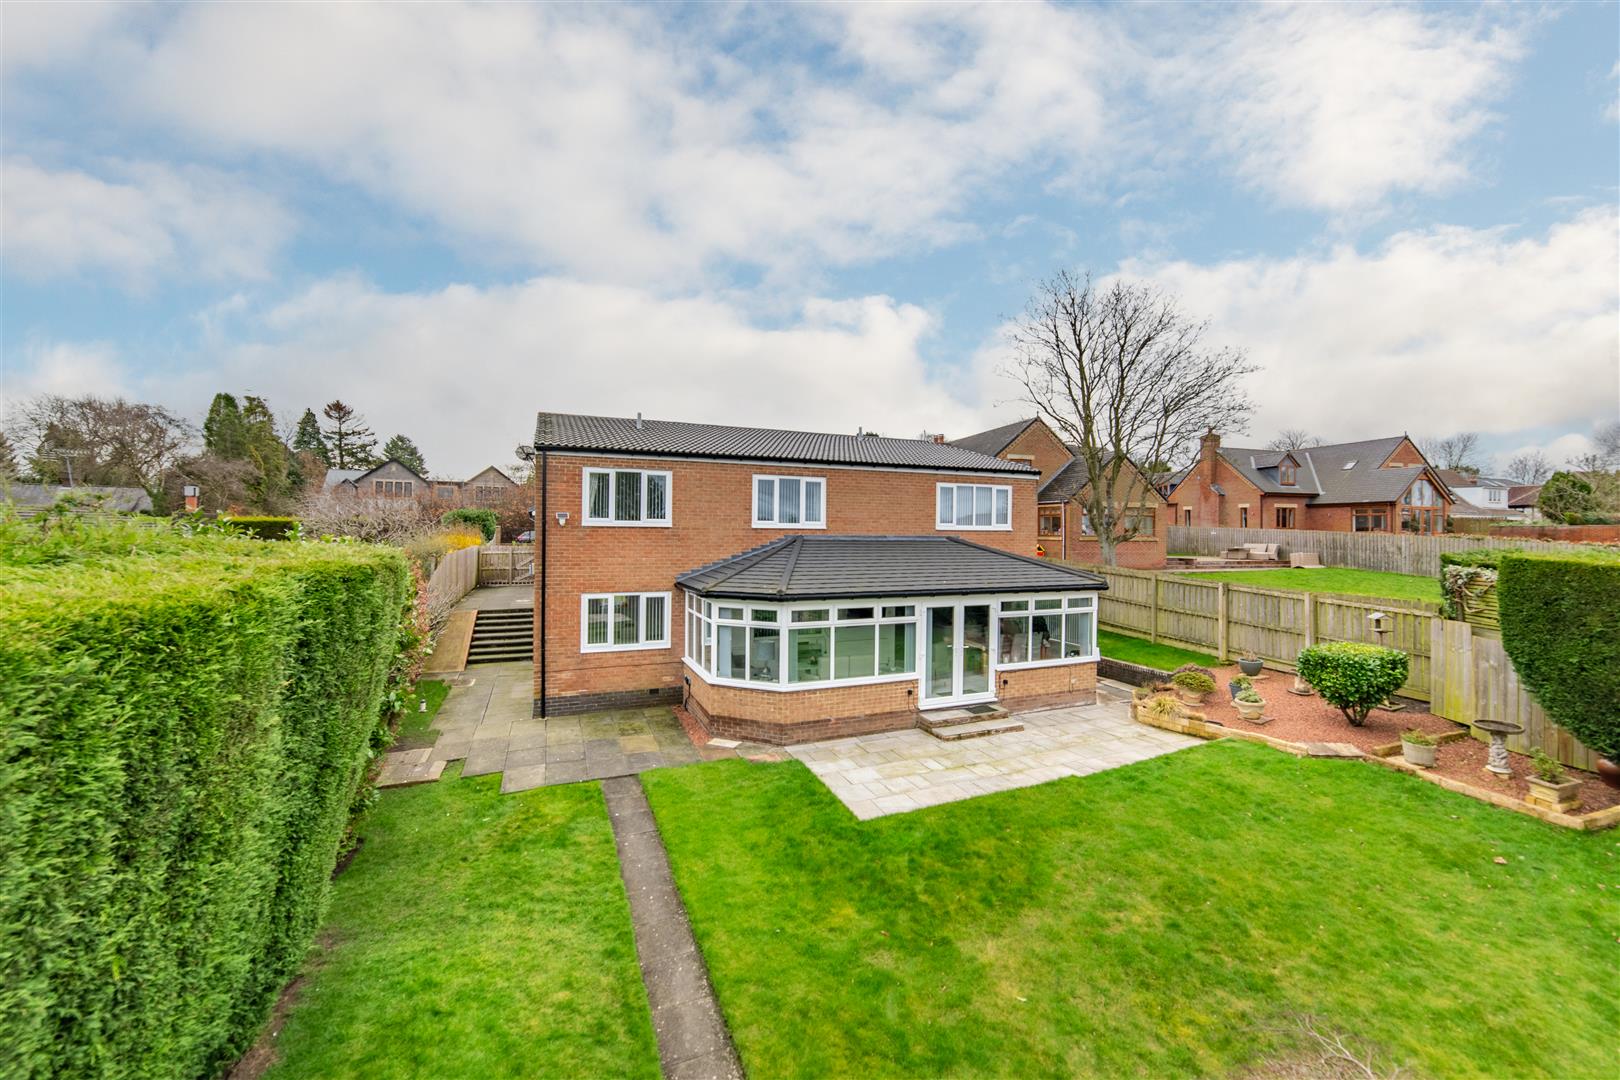 4 bed detached house for sale in Edge Hill, Ponteland, NE20